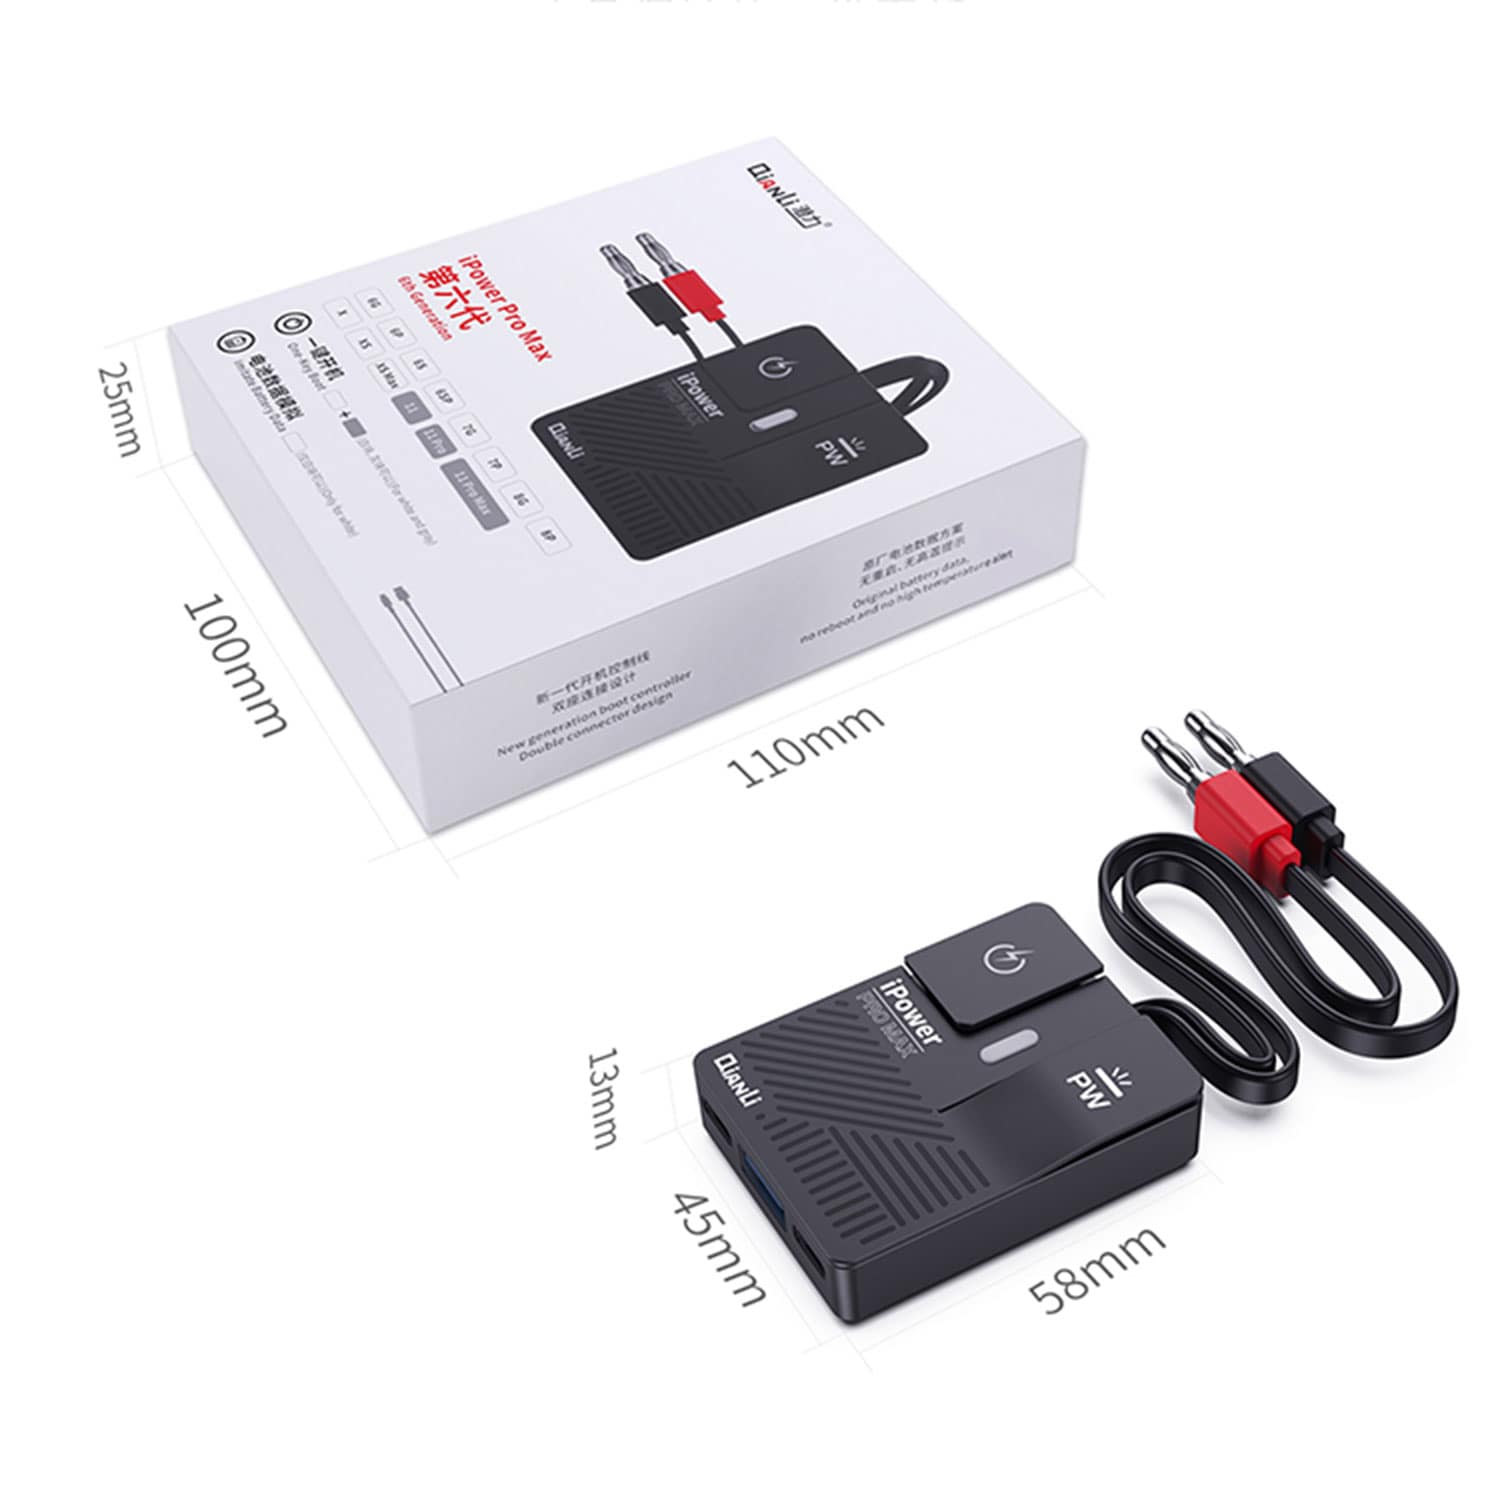 Qianli Toolplus Ipower Pro Max Power Line with On/off Switch for Iphone 6-11 Pro Max